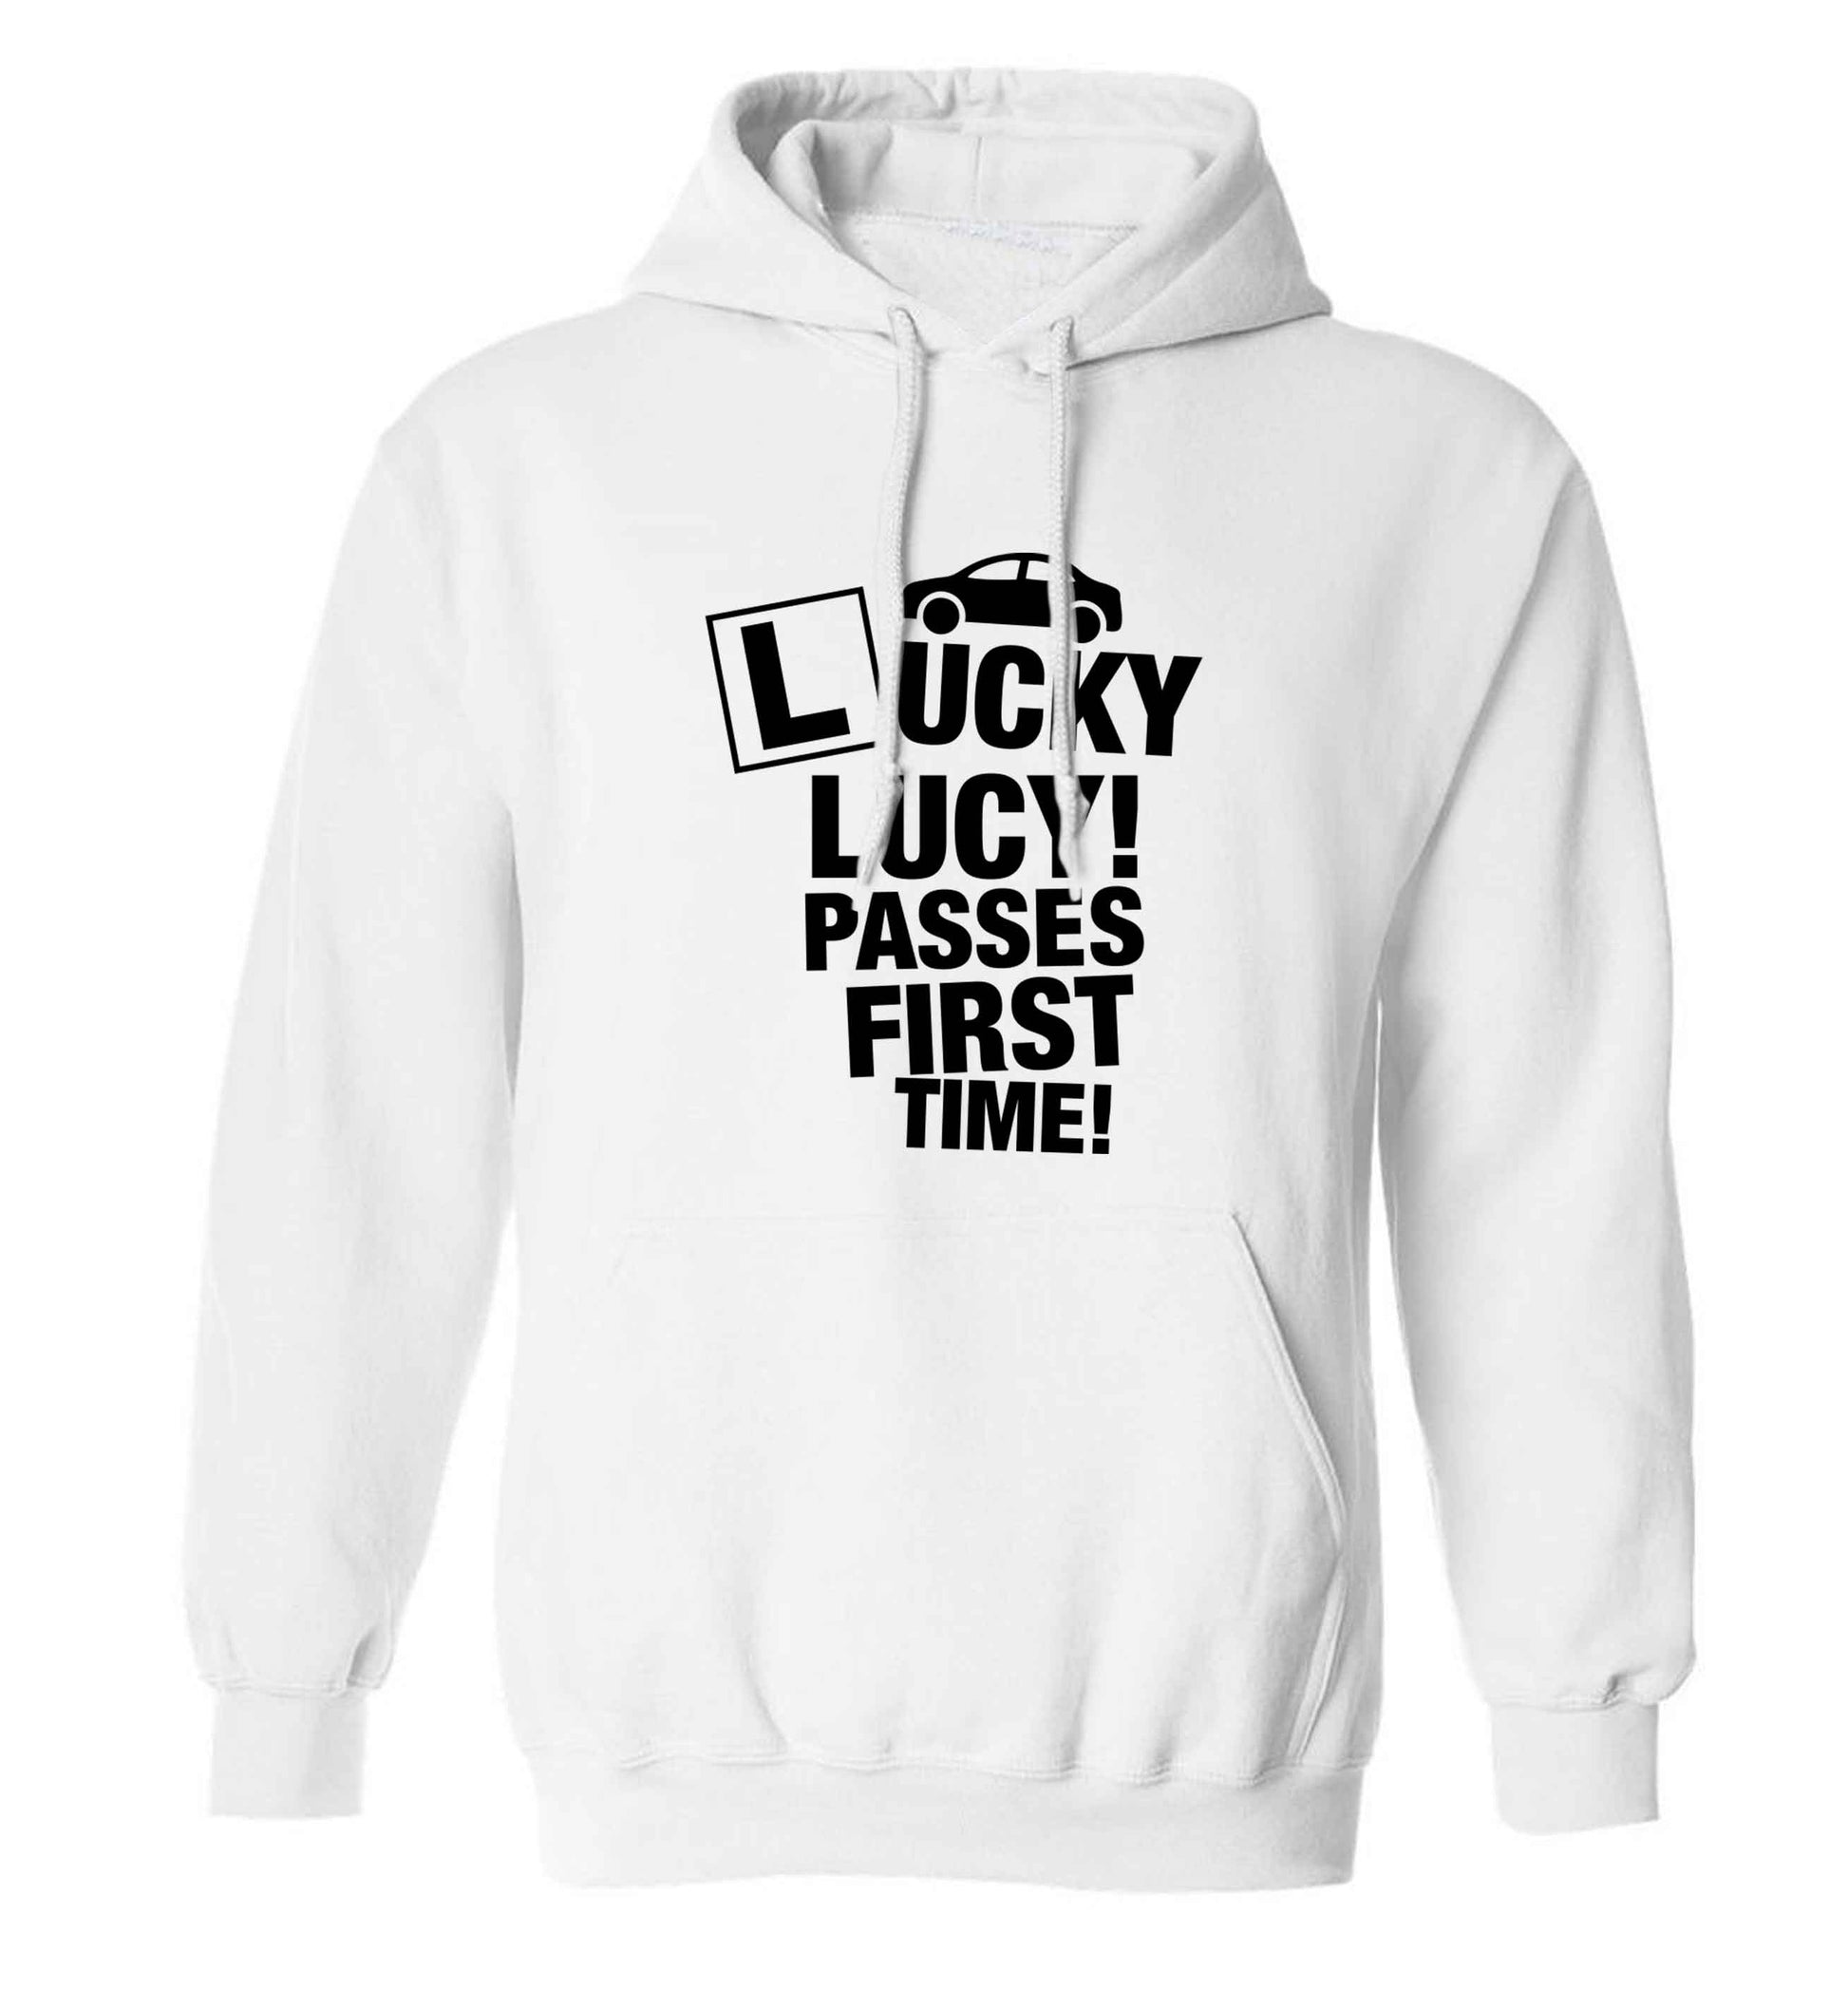 Personalised Lucky passes first time adults unisex white hoodie 2XL